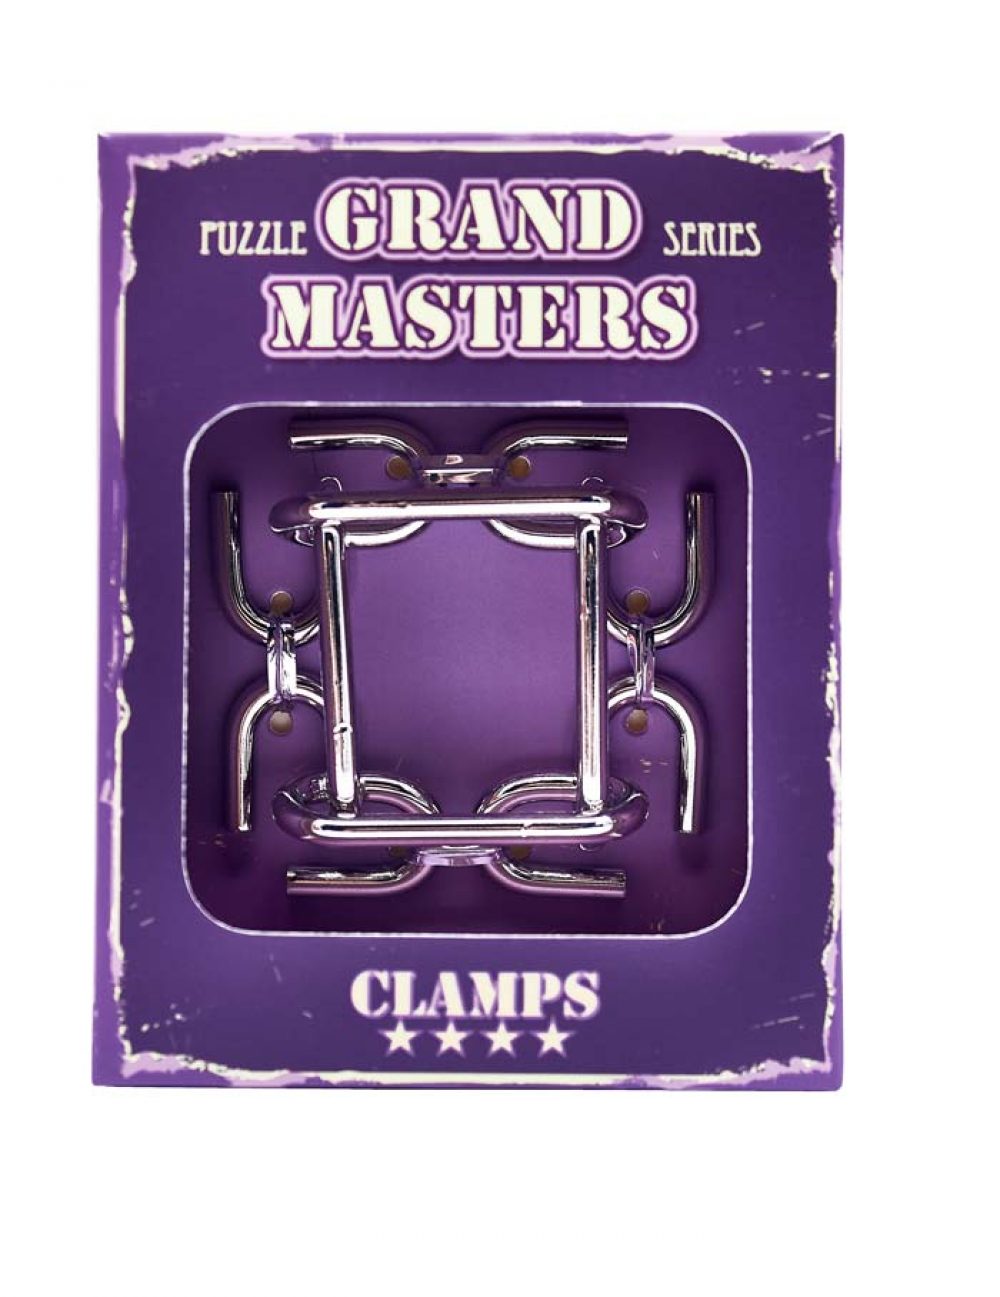 Grand Masters Clamps puzzel